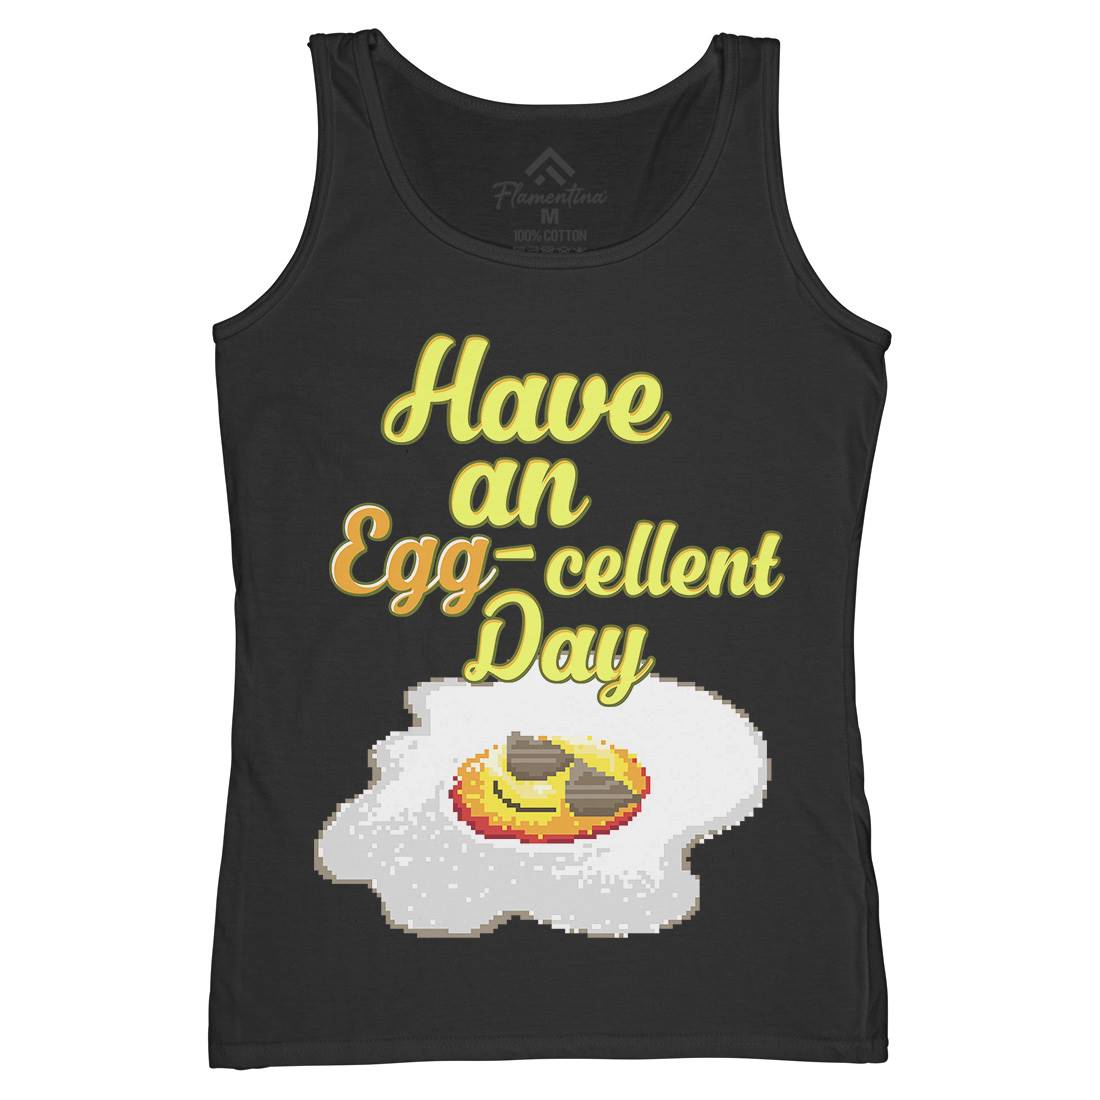 Have An Eggcellent Day Womens Organic Tank Top Vest Food B911